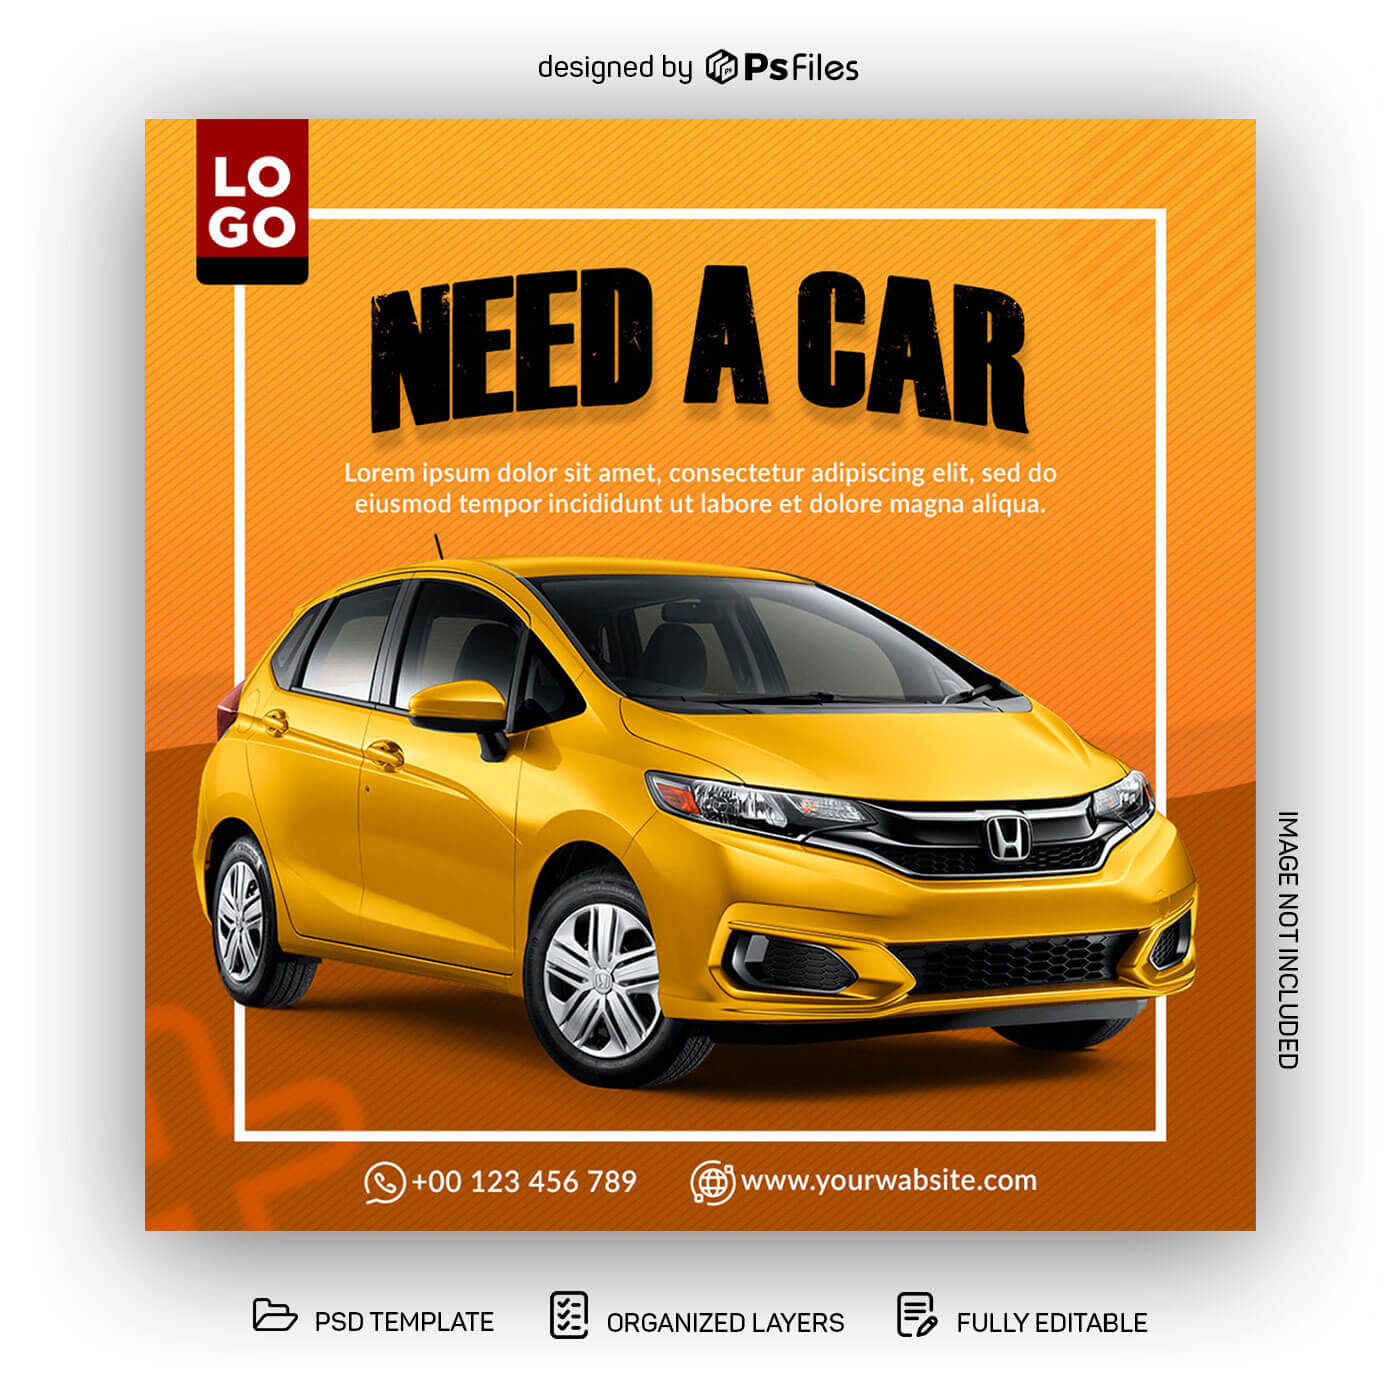 Yellow Color Car Cab and Taxi Need car Free Indtagram Post Design PSD Template PsFiles